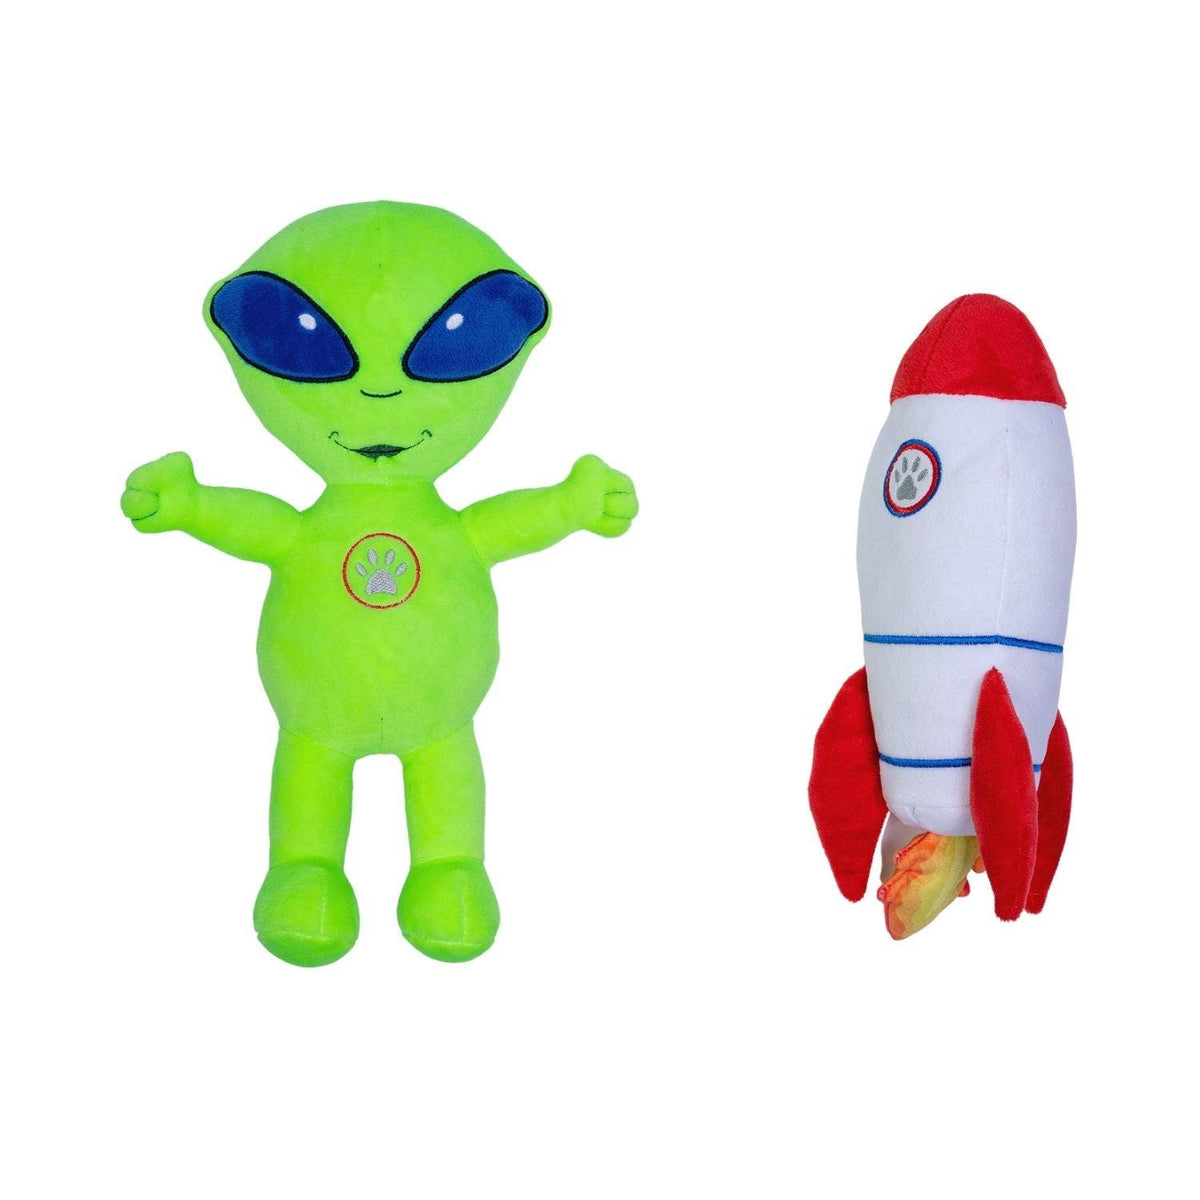 Out of this World Crinkle and Squeaky Plush Dog Toy Combo by American Pet Supplies